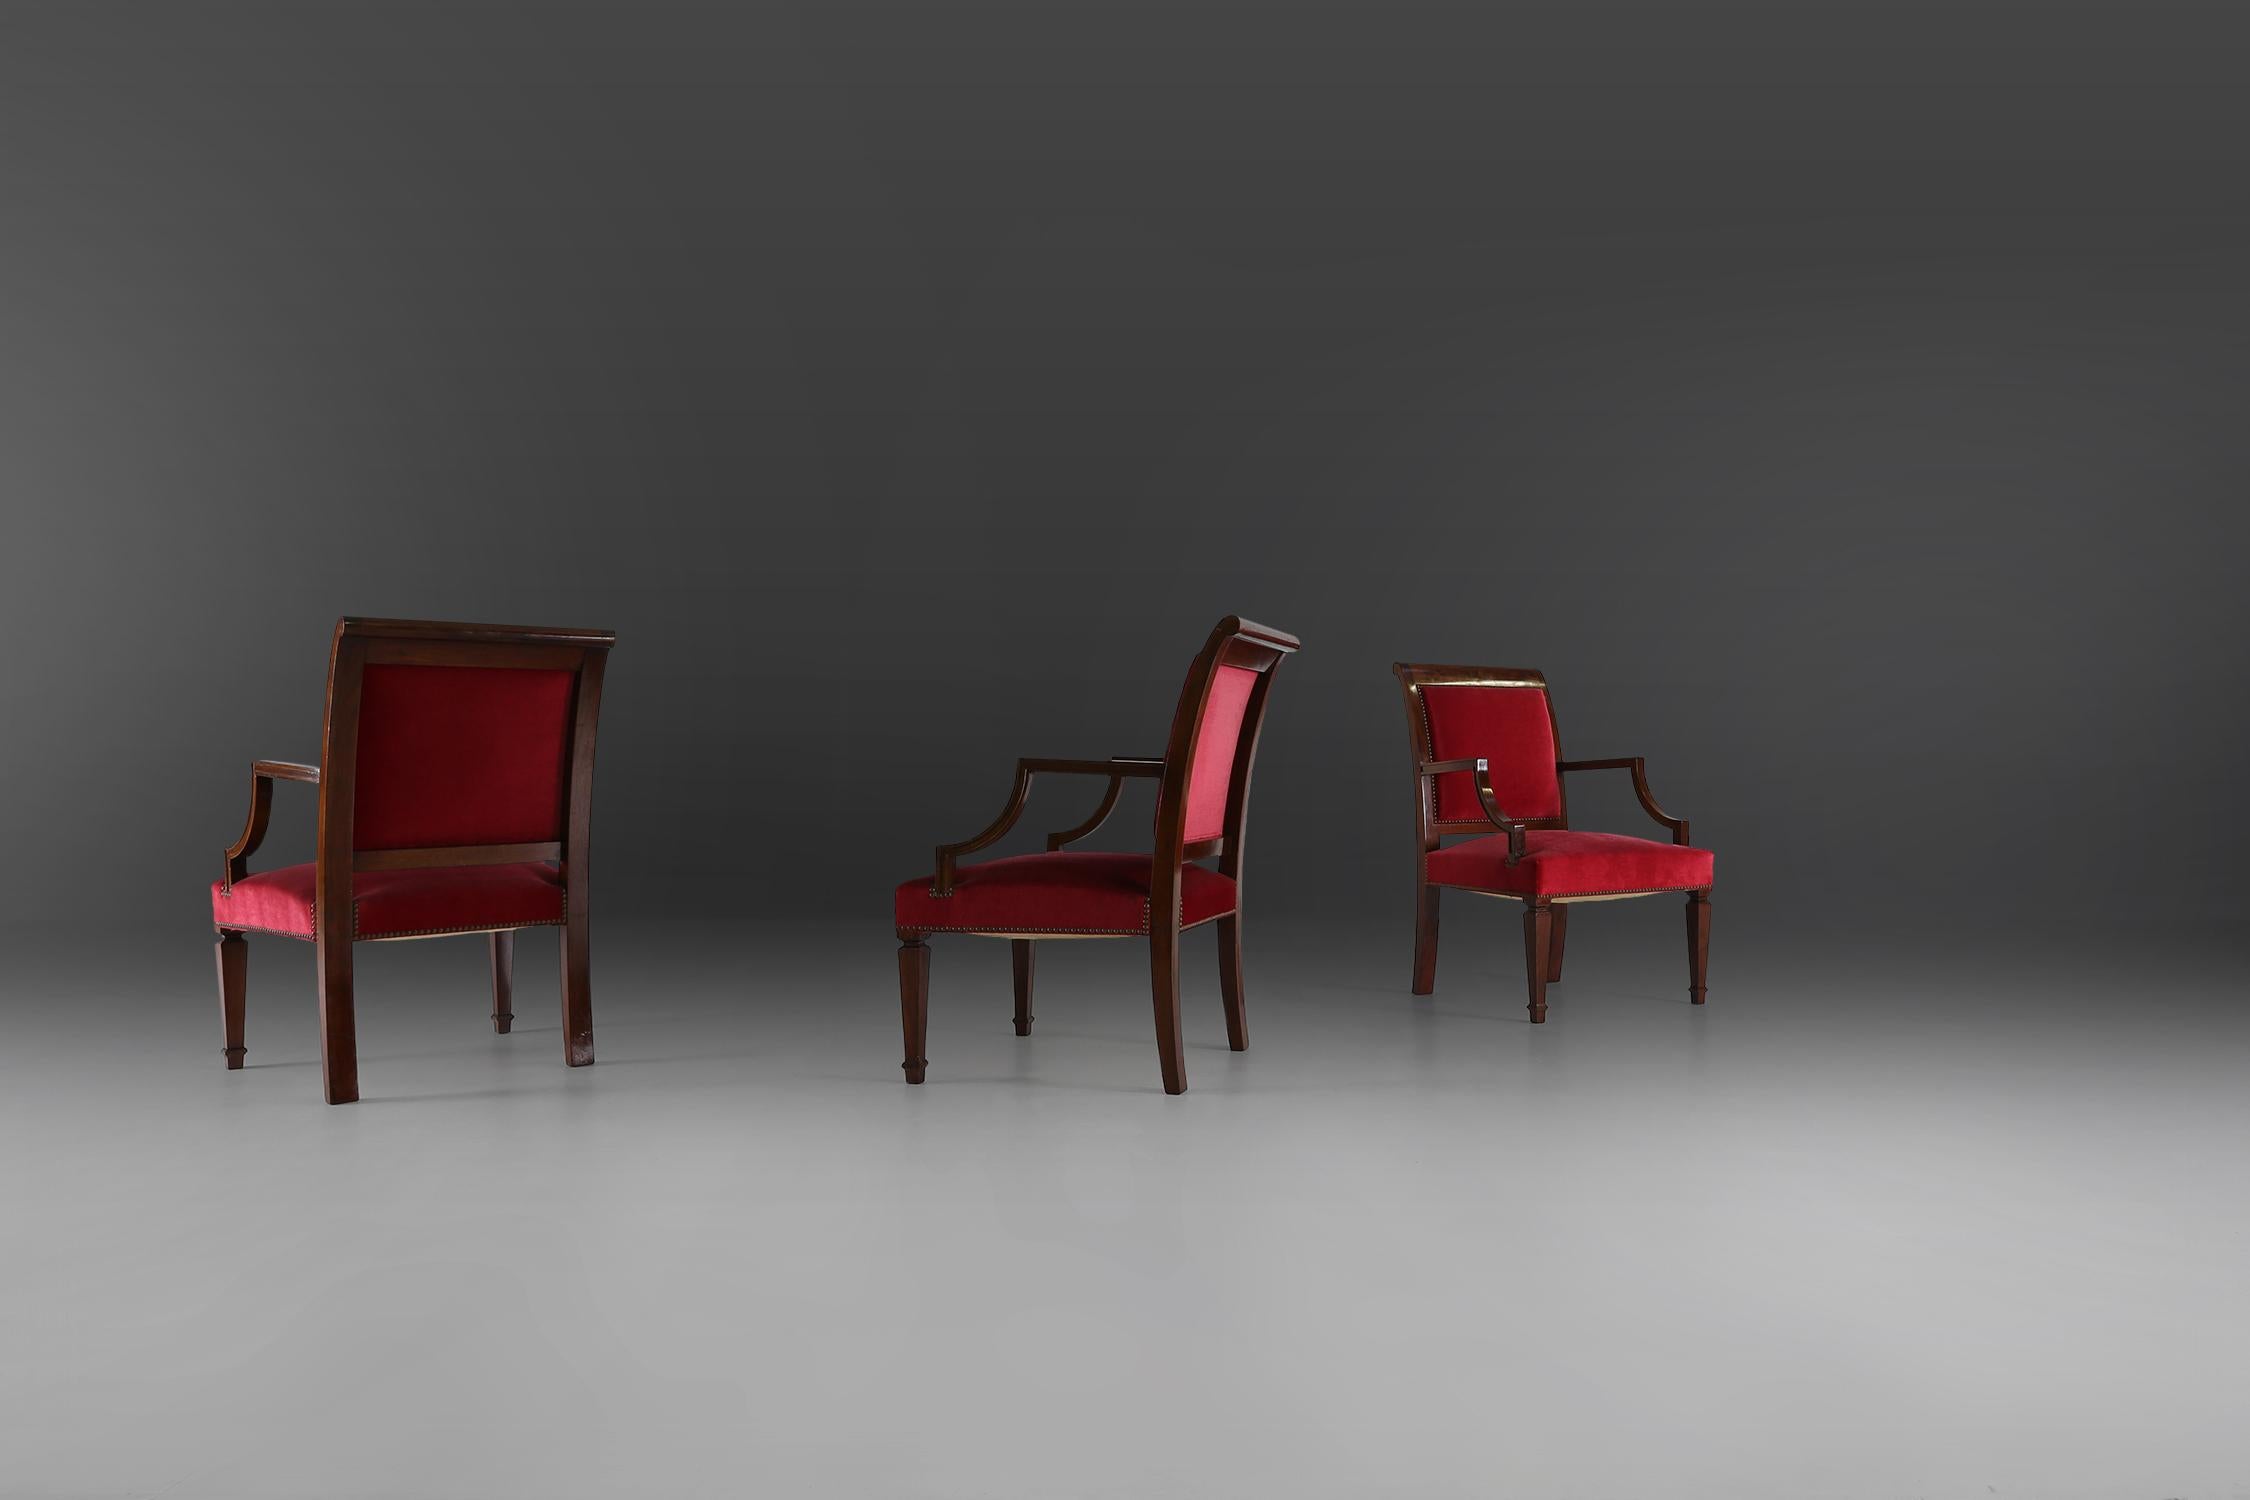 Empire style chairs made in high quality wood and red fabric. in a very good condition.

PRICE PER PIECE.